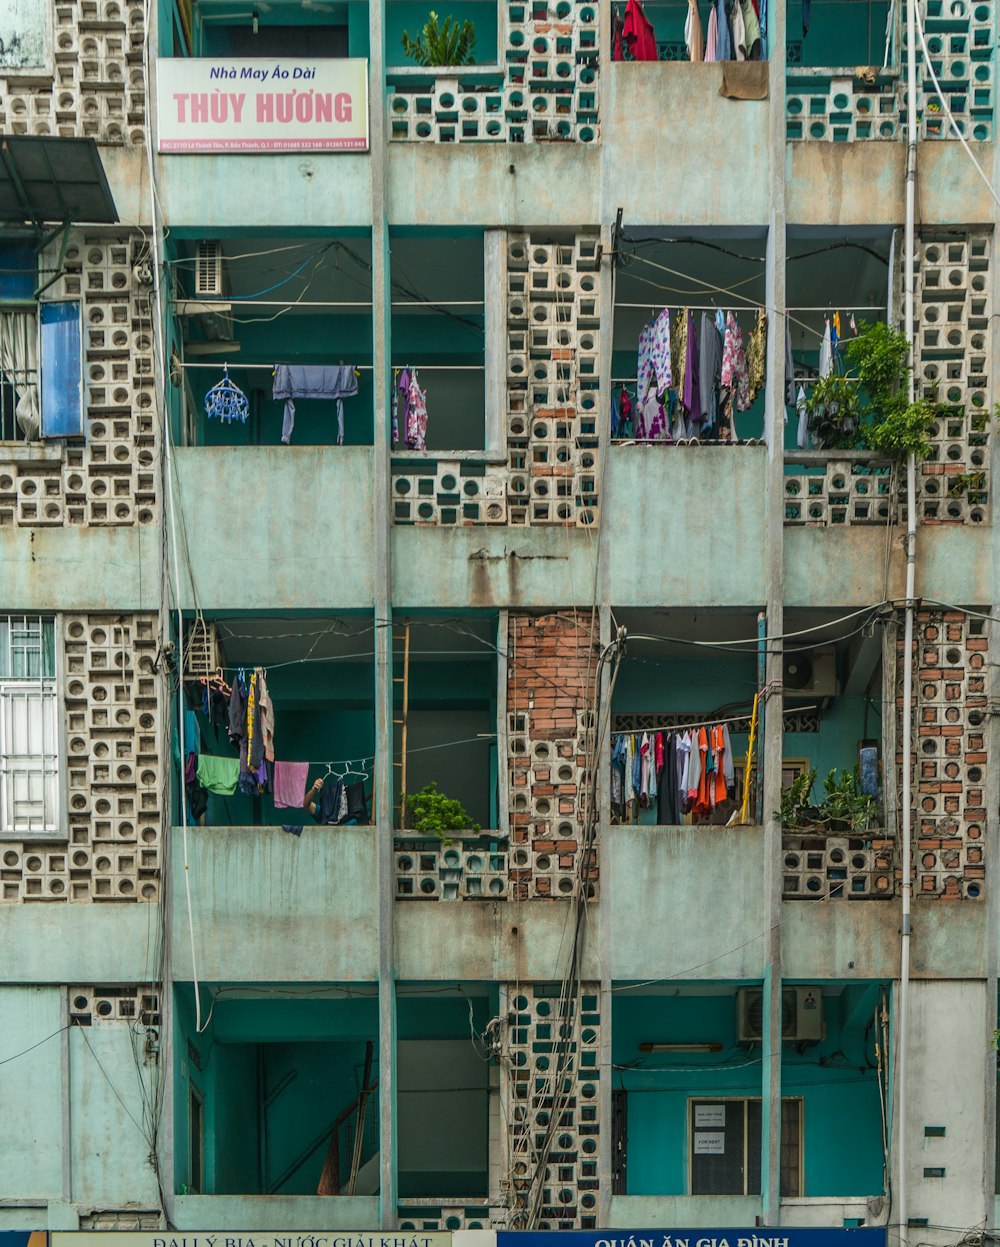 clothes hanged from apartment-style building